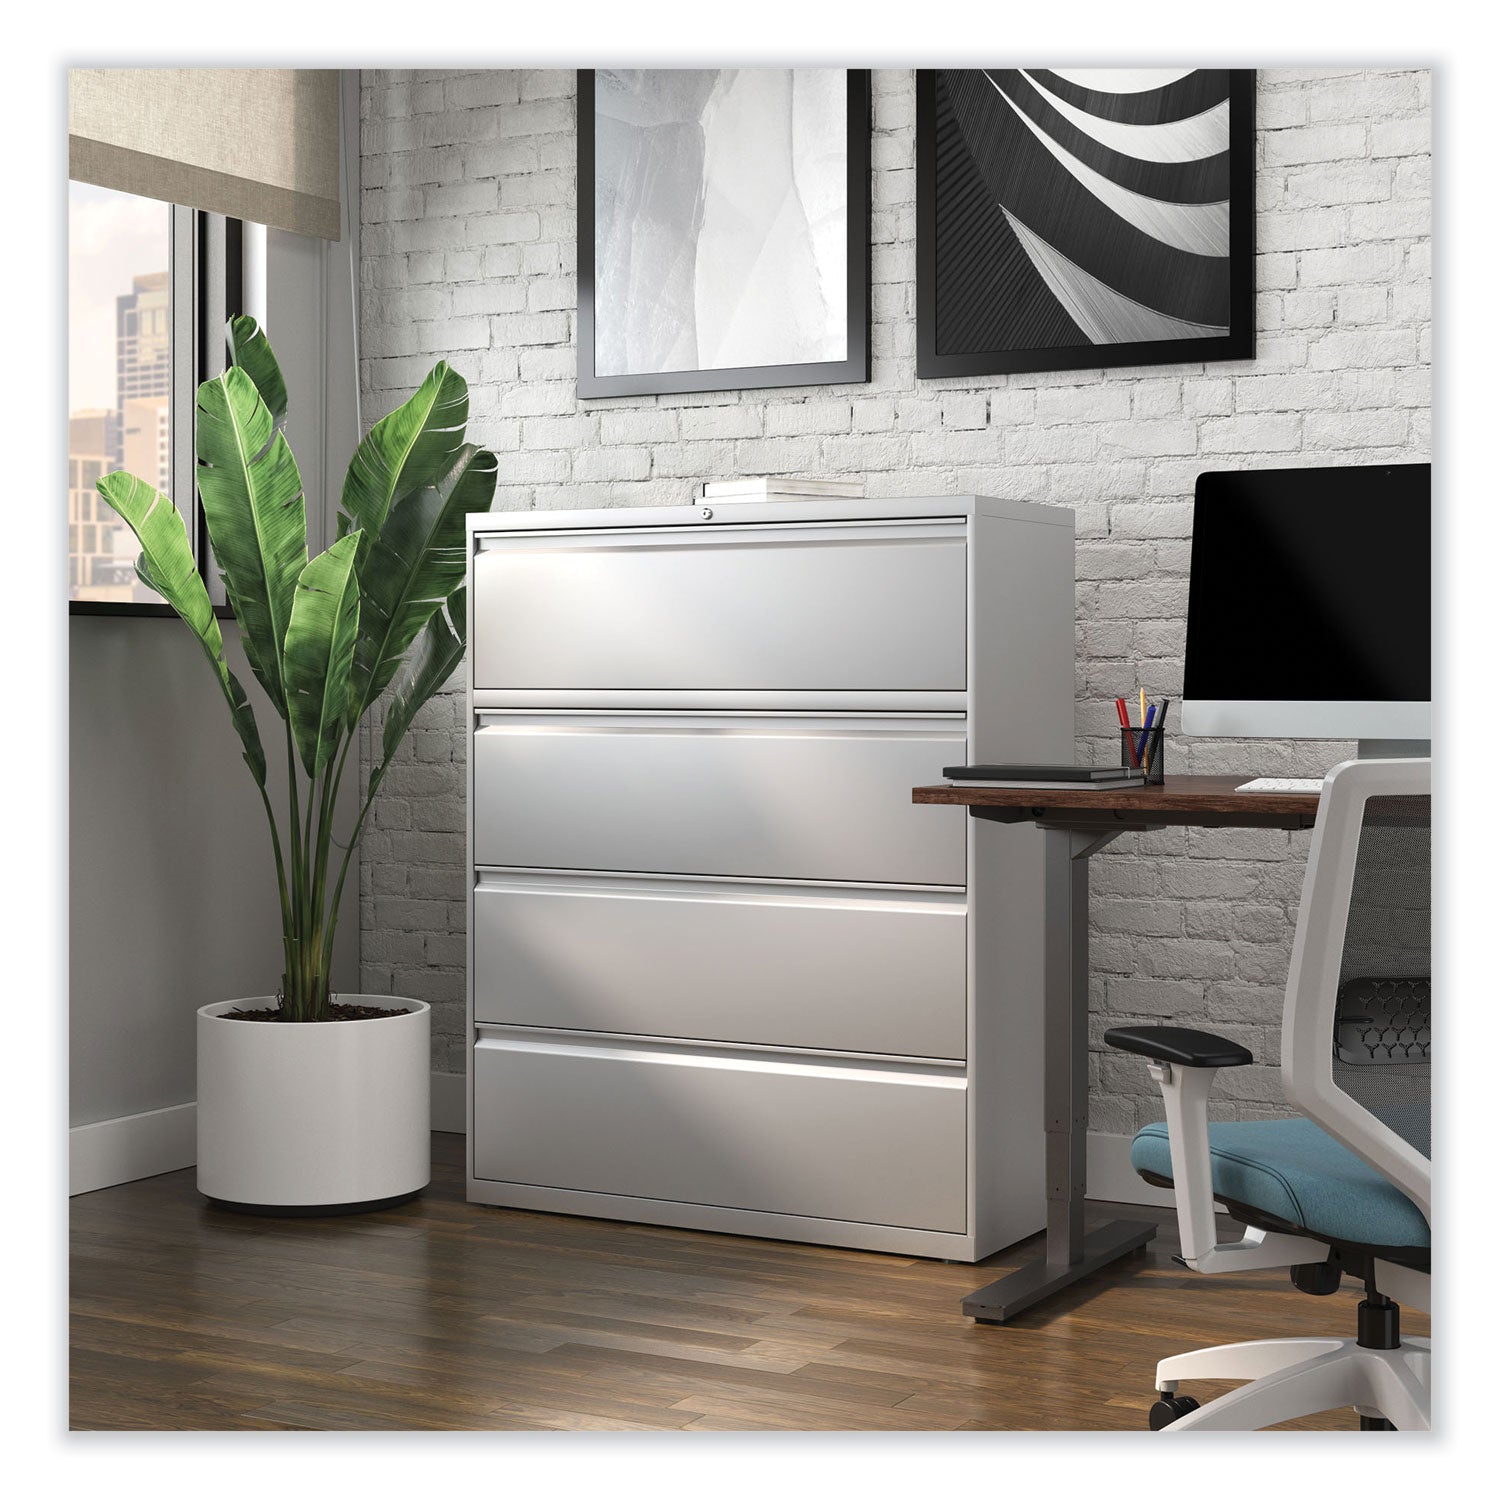 lateral-file-4-legal-letter-size-file-drawers-light-gray-42-x-1863-x-525_alehlf4254lg - 7